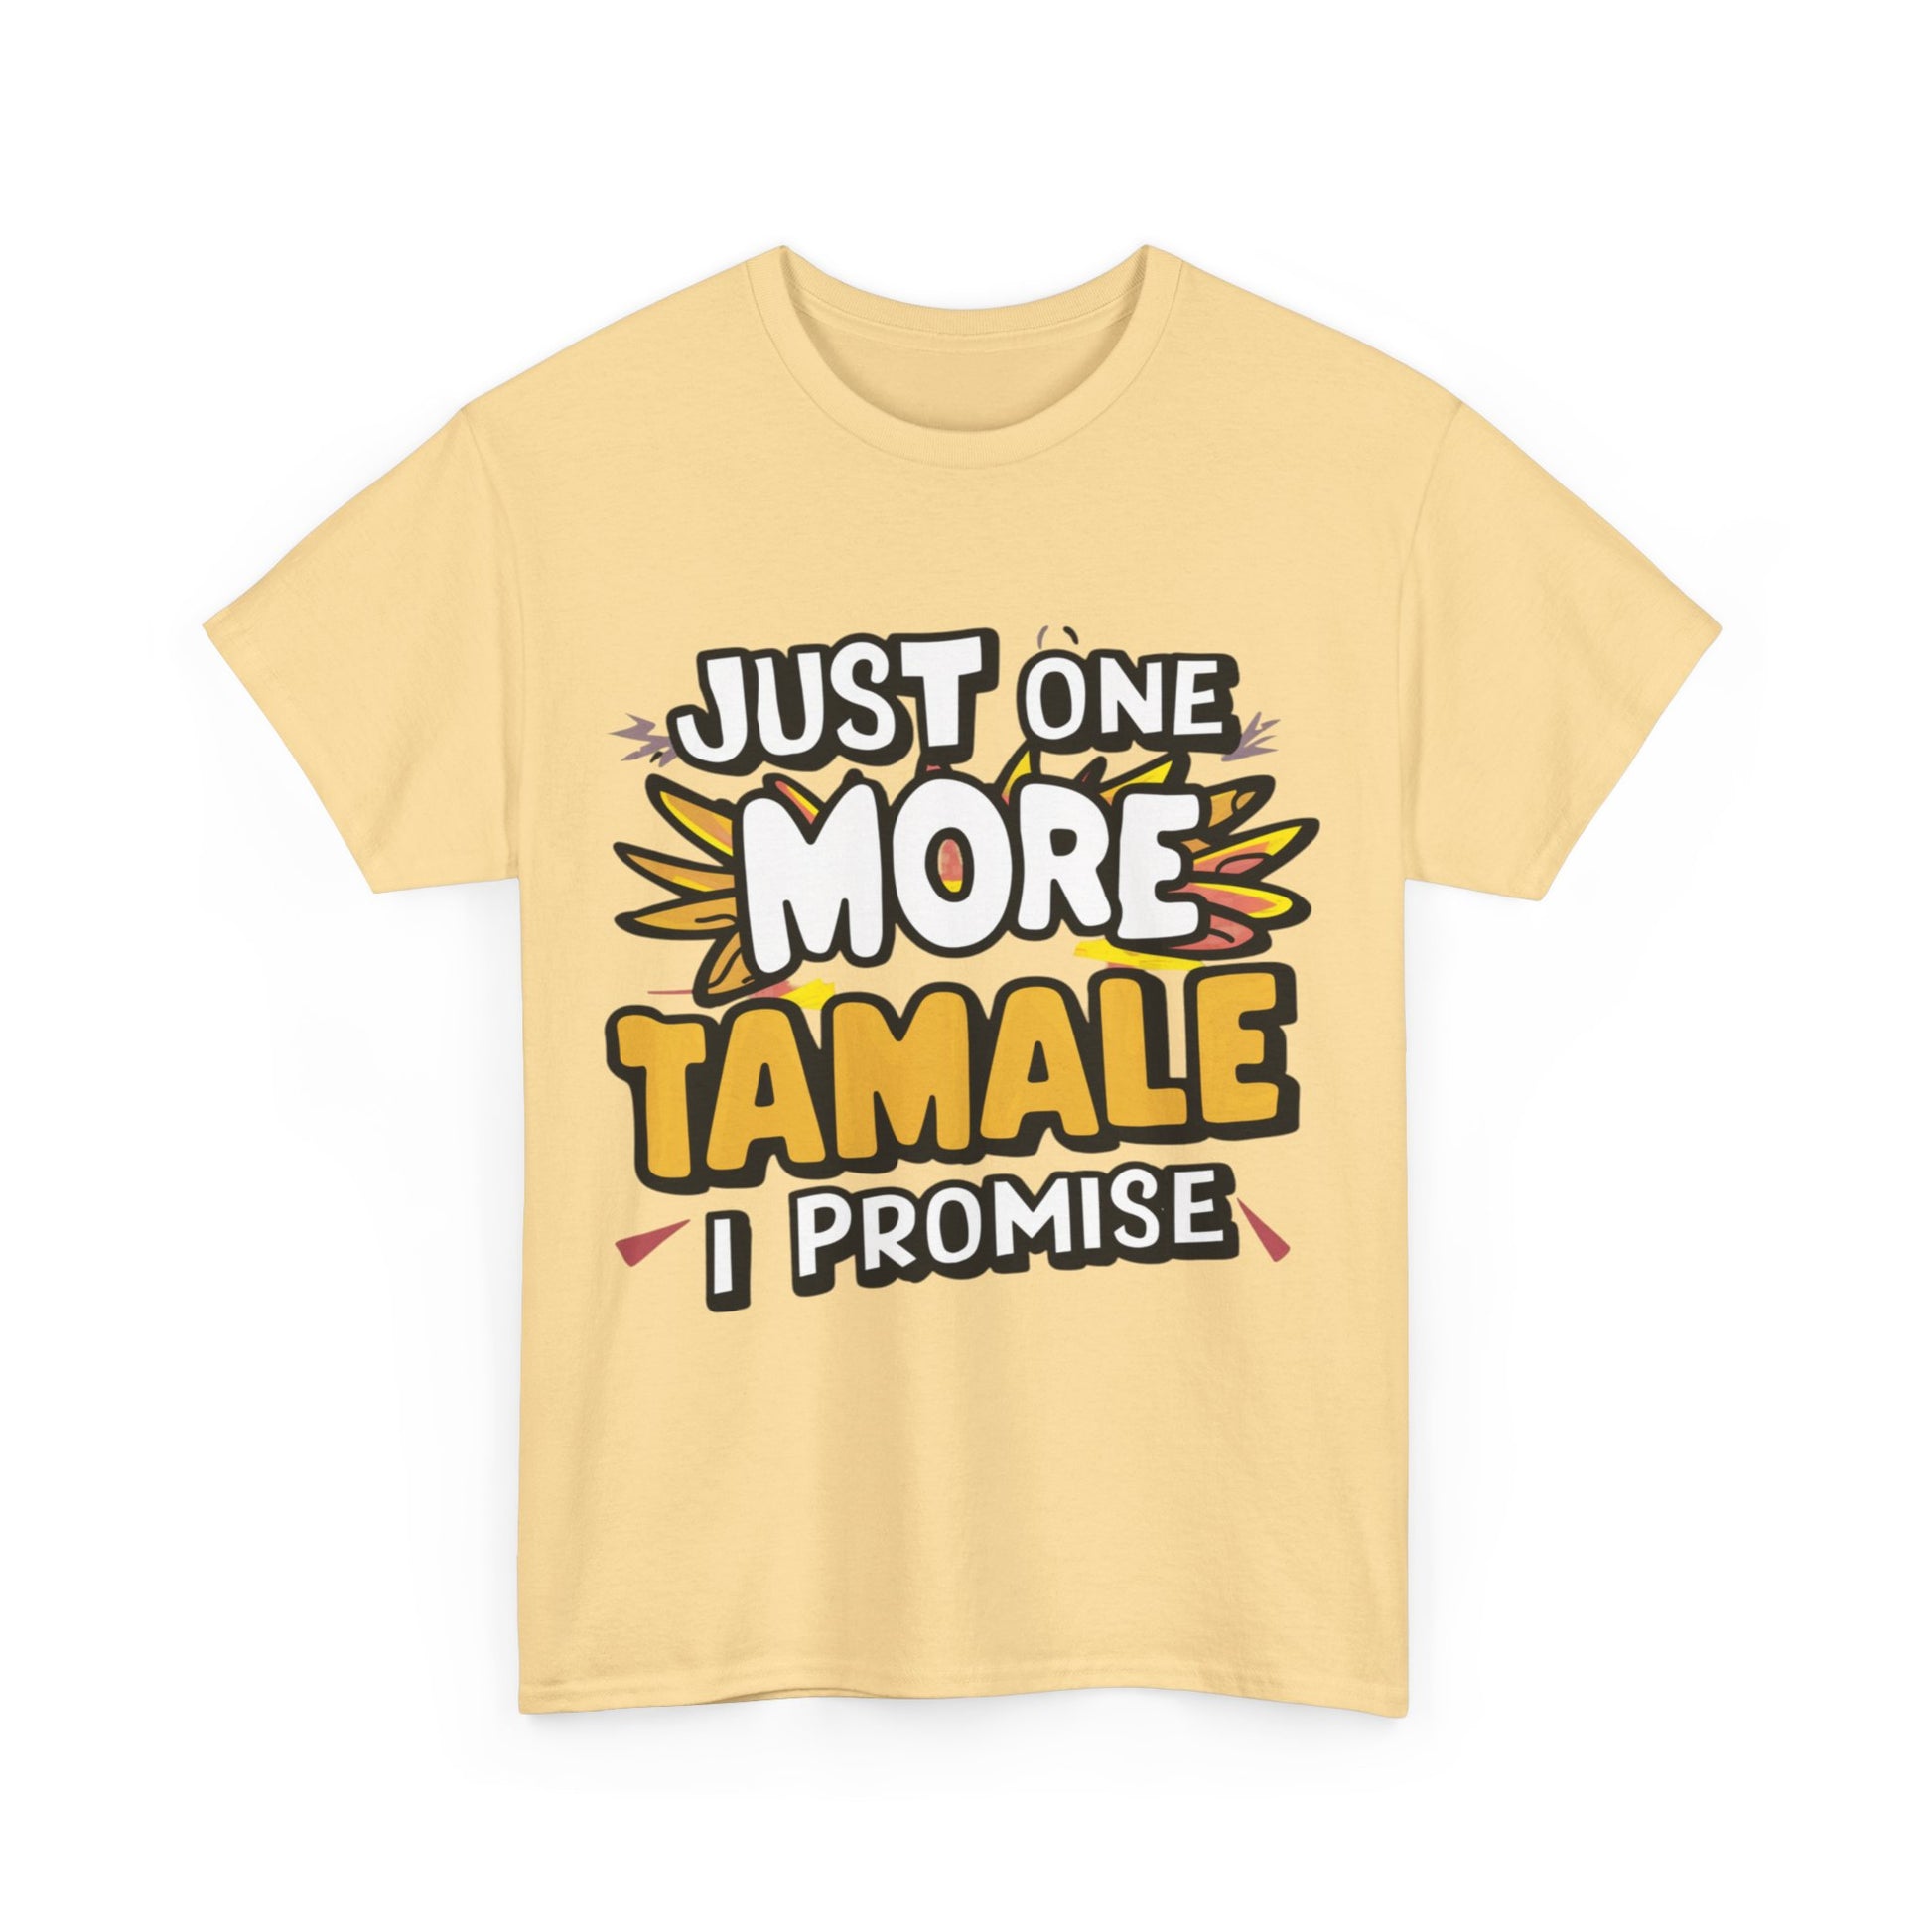 Just One More Tamale I Promise Mexican Food Graphic Unisex Heavy Cotton Tee Cotton Funny Humorous Graphic Soft Premium Unisex Men Women Yellow Haze T-shirt Birthday Gift-45